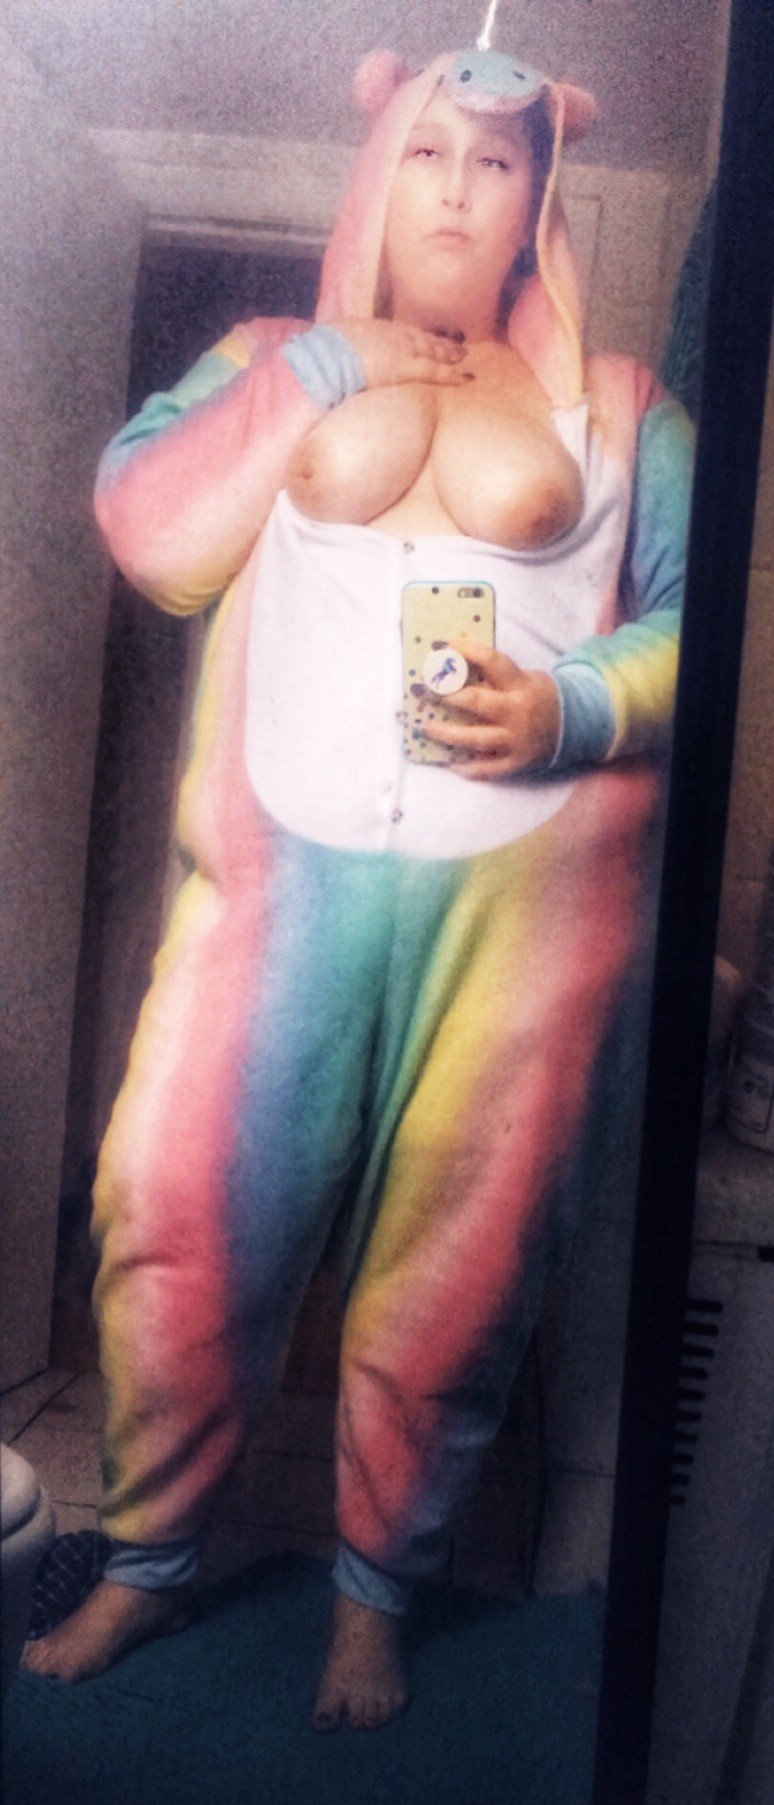 Photo by Miss Sadie K with the username @MissSadieK, who is a star user,  November 2, 2019 at 11:53 PM. The post is about the topic BBW and the text says 'i got a unicorn onsie 😜 do you like it?'